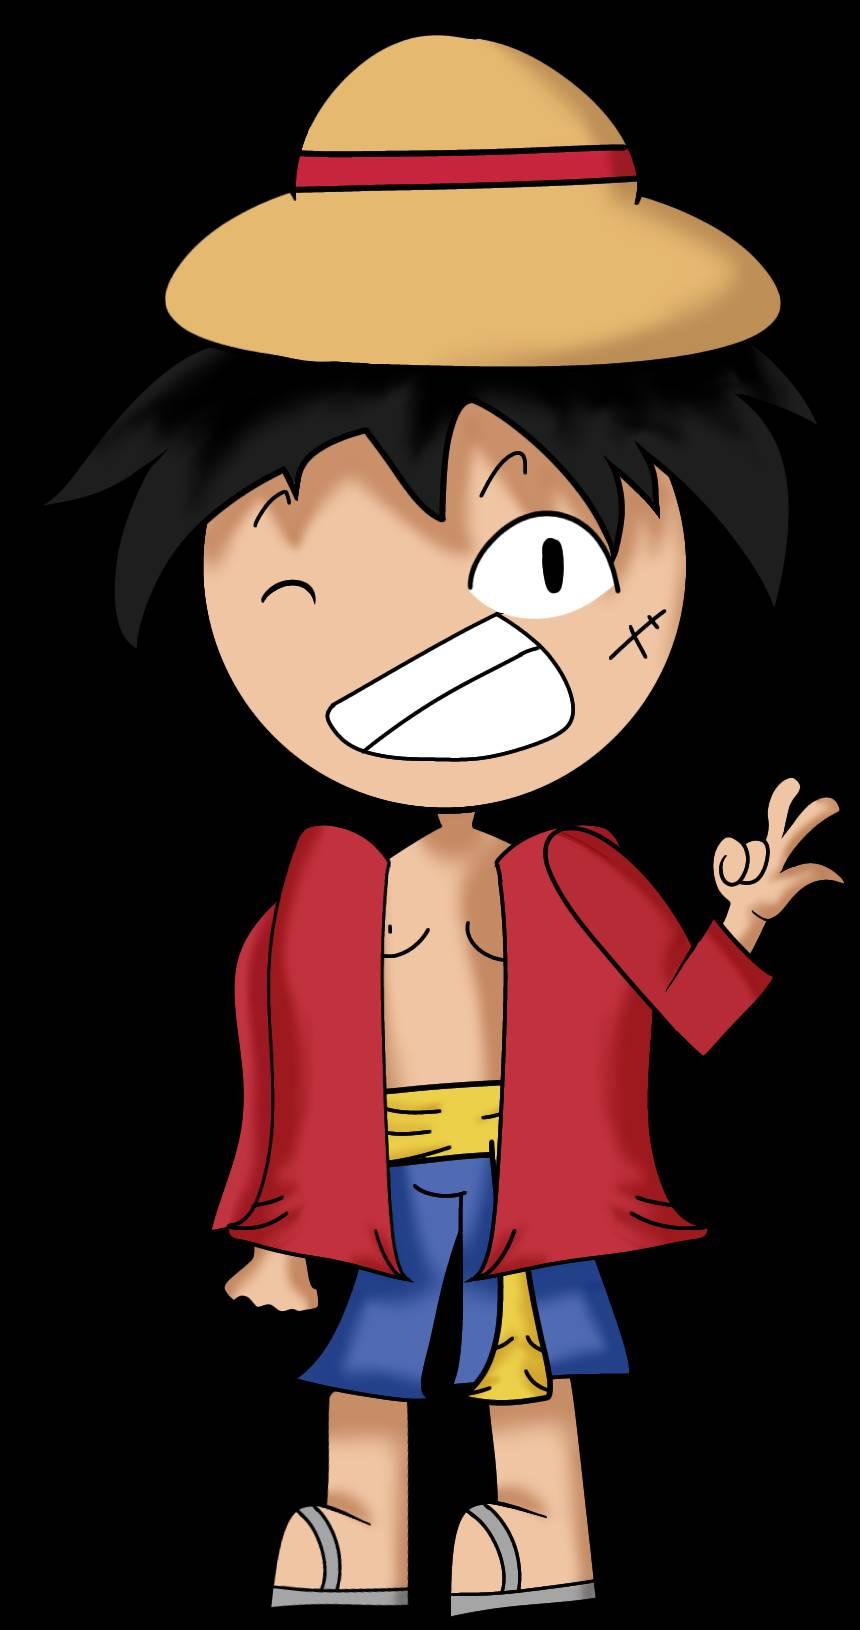 Luffy Chibi Android Wallpaper Image 860x1631